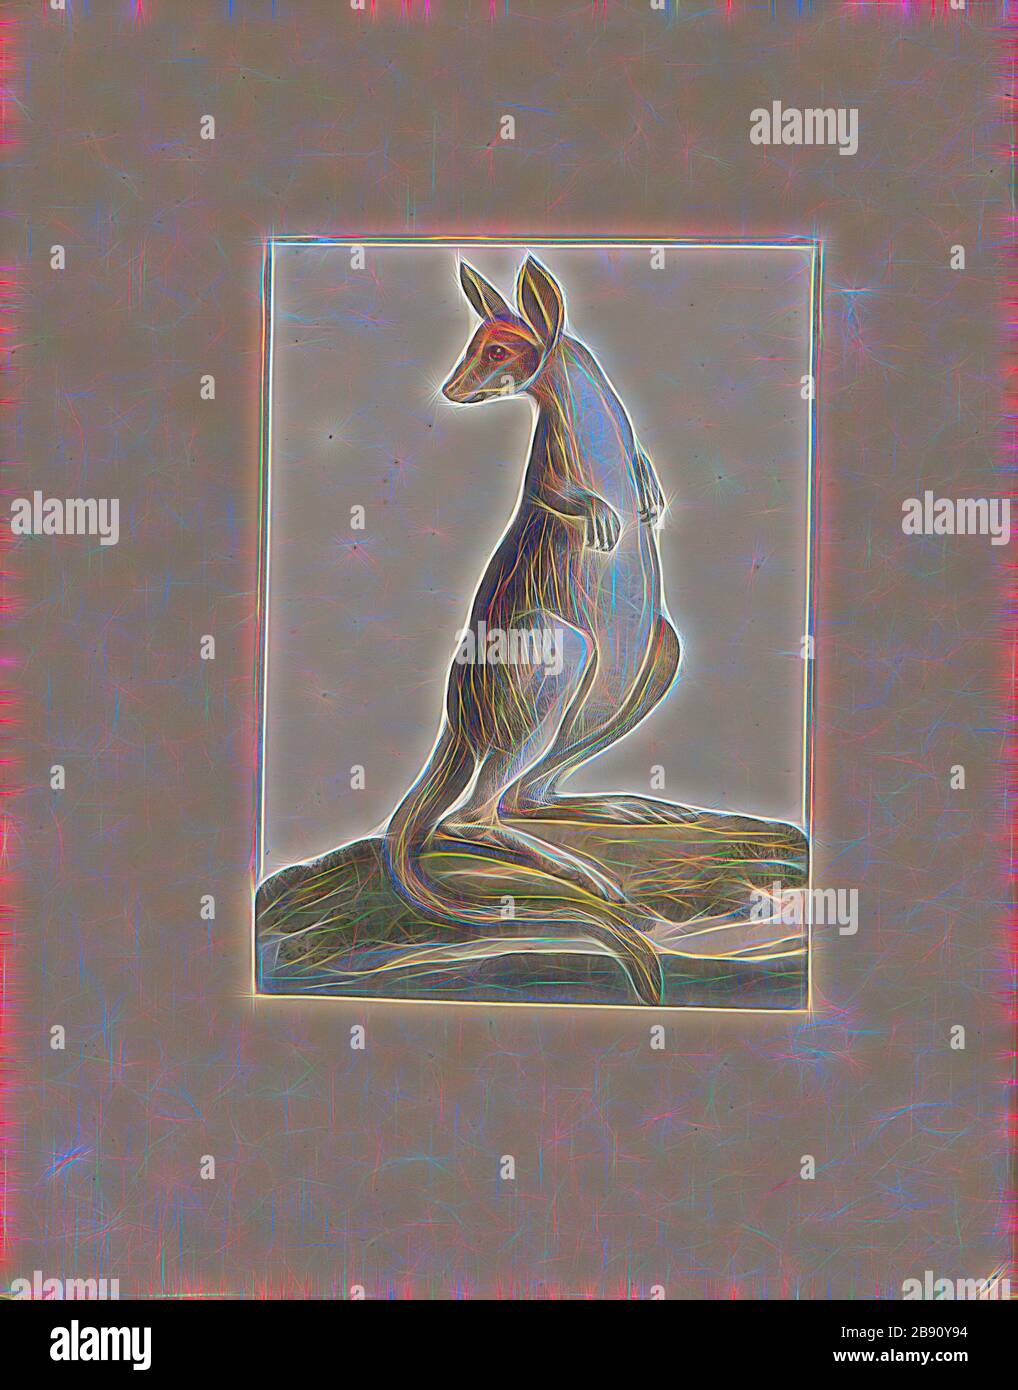 Macropus giganteus, Print, The eastern grey kangaroo (Macropus giganteus) is a marsupial found in southern and eastern Australia, with a population of several million. It is also known as the great grey kangaroo and the forester kangaroo. Although a big eastern grey male typically masses around 66 kg (weight 145 lb.) and stands almost 2 m (6.6 ft.) tall, the scientific name, Macropus giganteus (gigantic large-foot), is misleading: the red kangaroo of the semi-arid inland is larger, weighing up to 90 kg., 1700-1880, Reimagined by Gibon, design of warm cheerful glowing of brightness and light ra Stock Photo